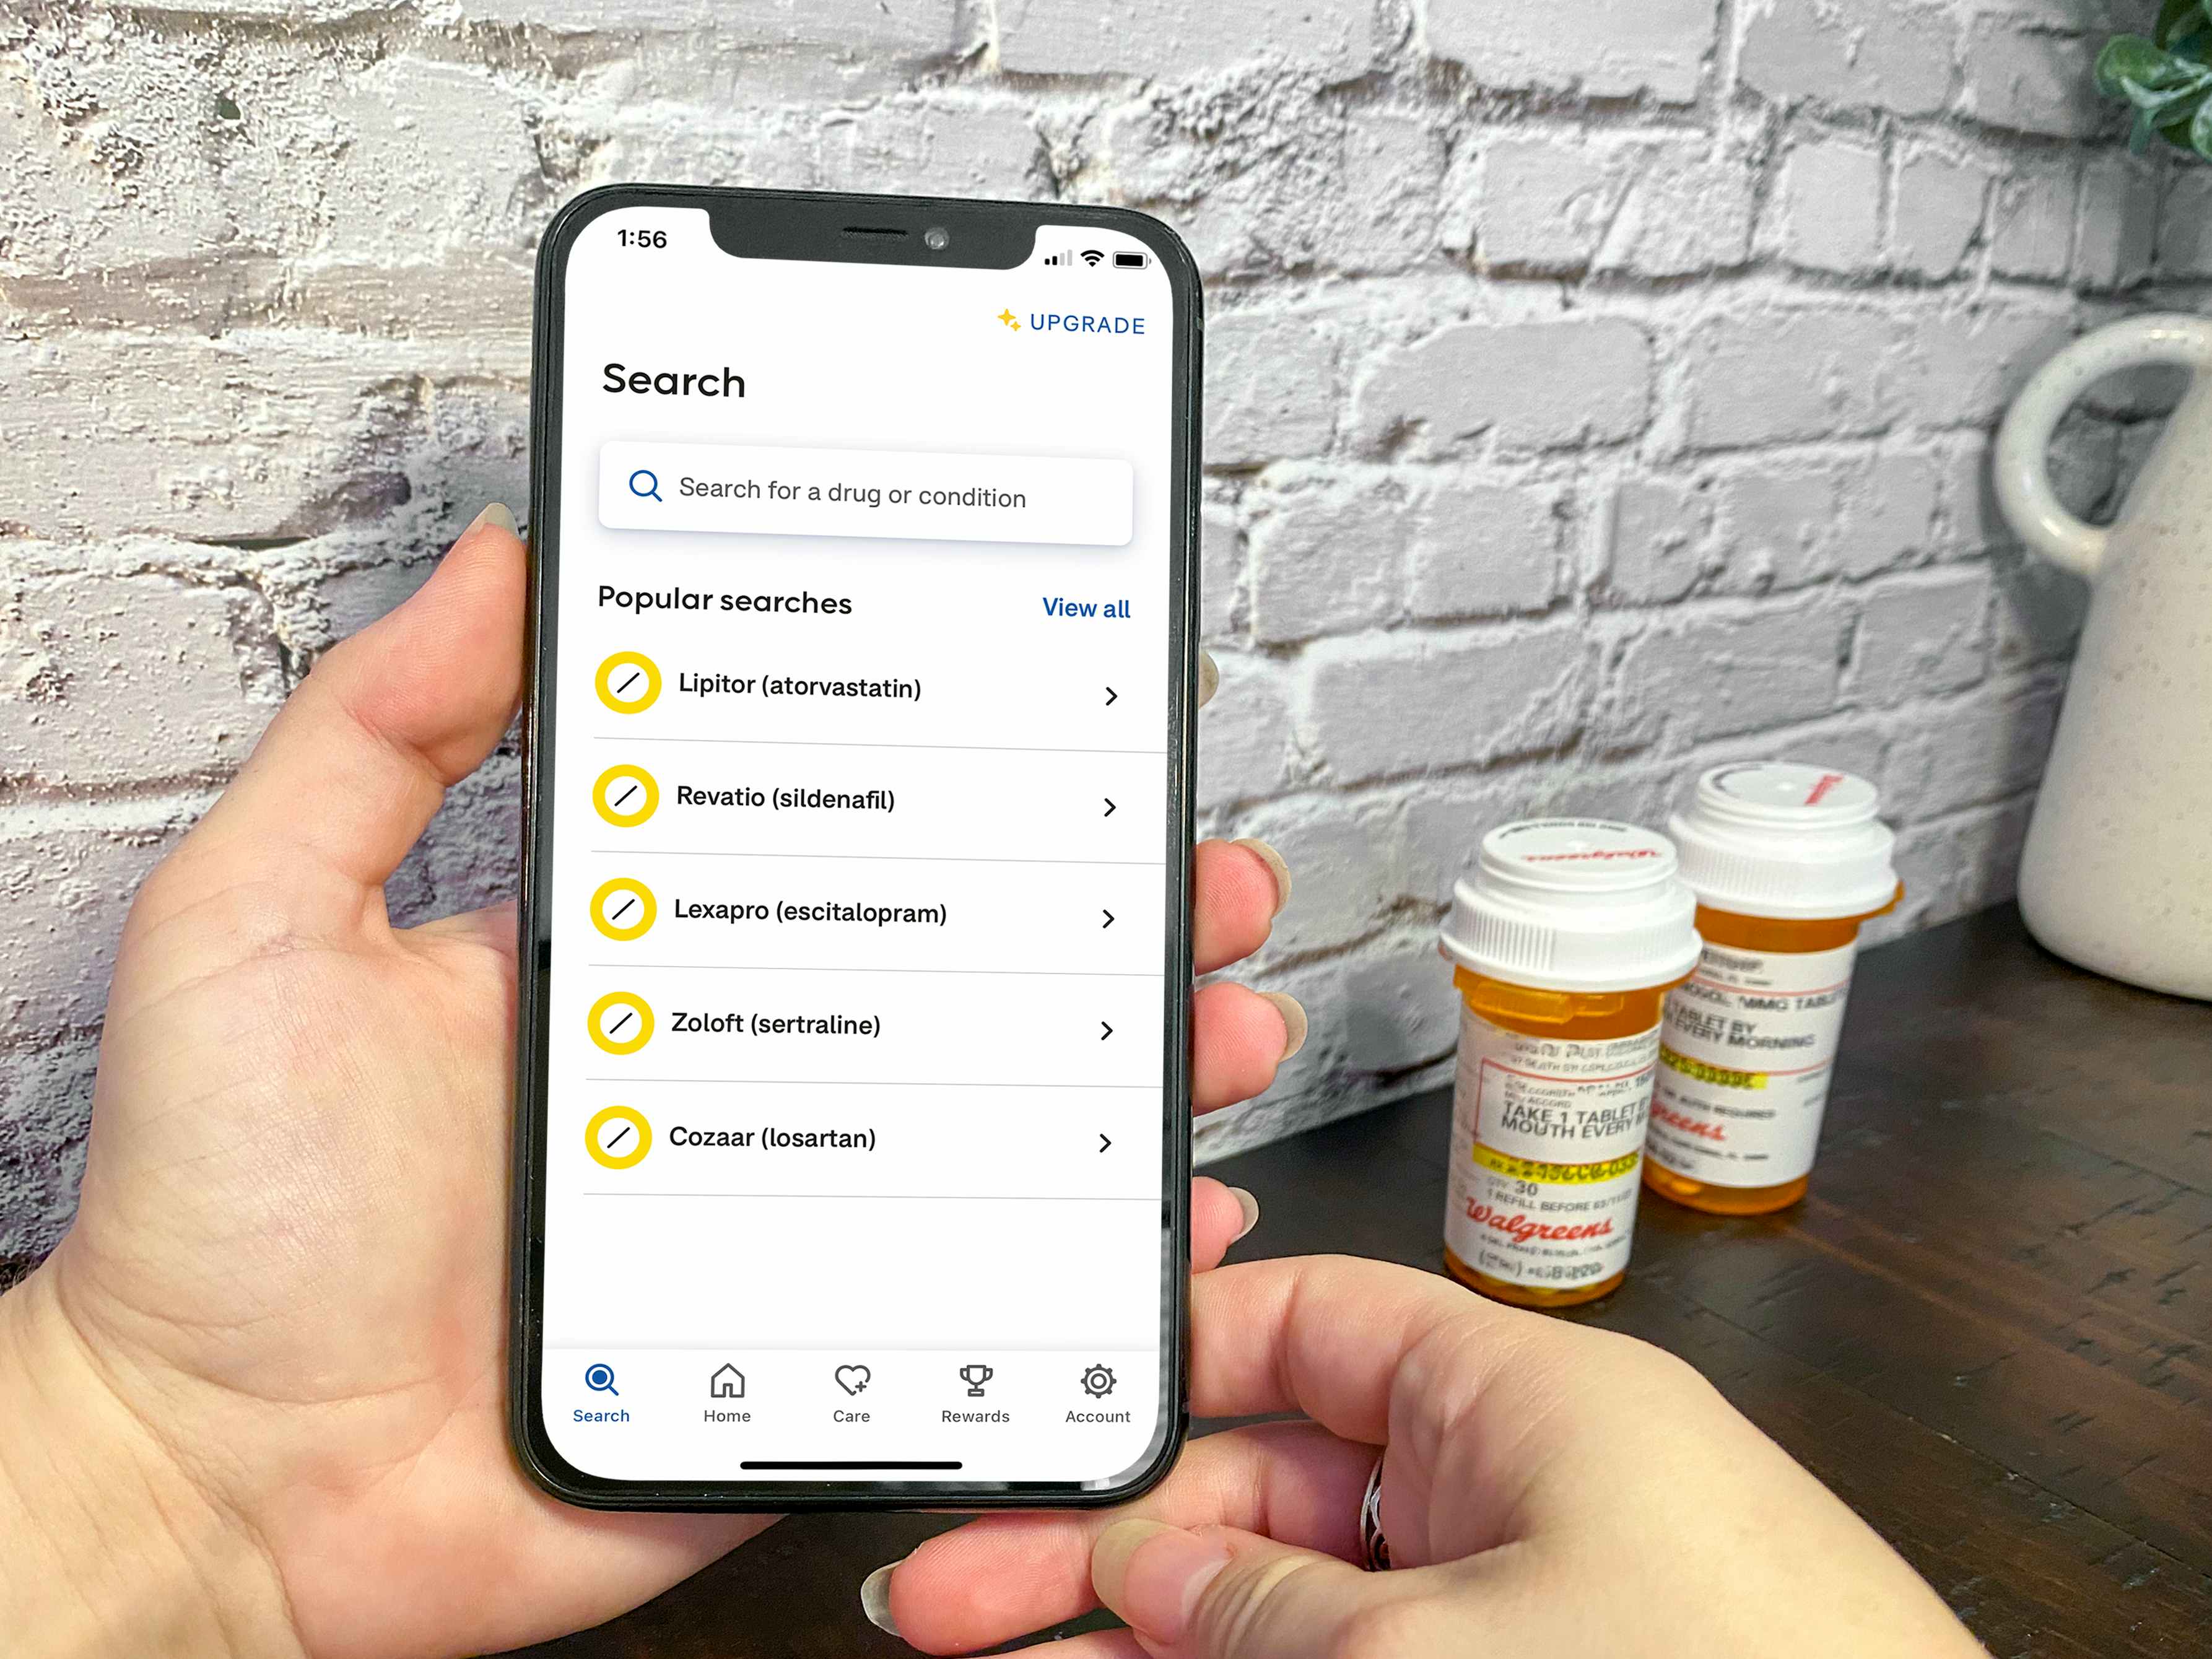 Someone holding a cell phone displaying the GoodRx app search screen next to some prescription medications on a table